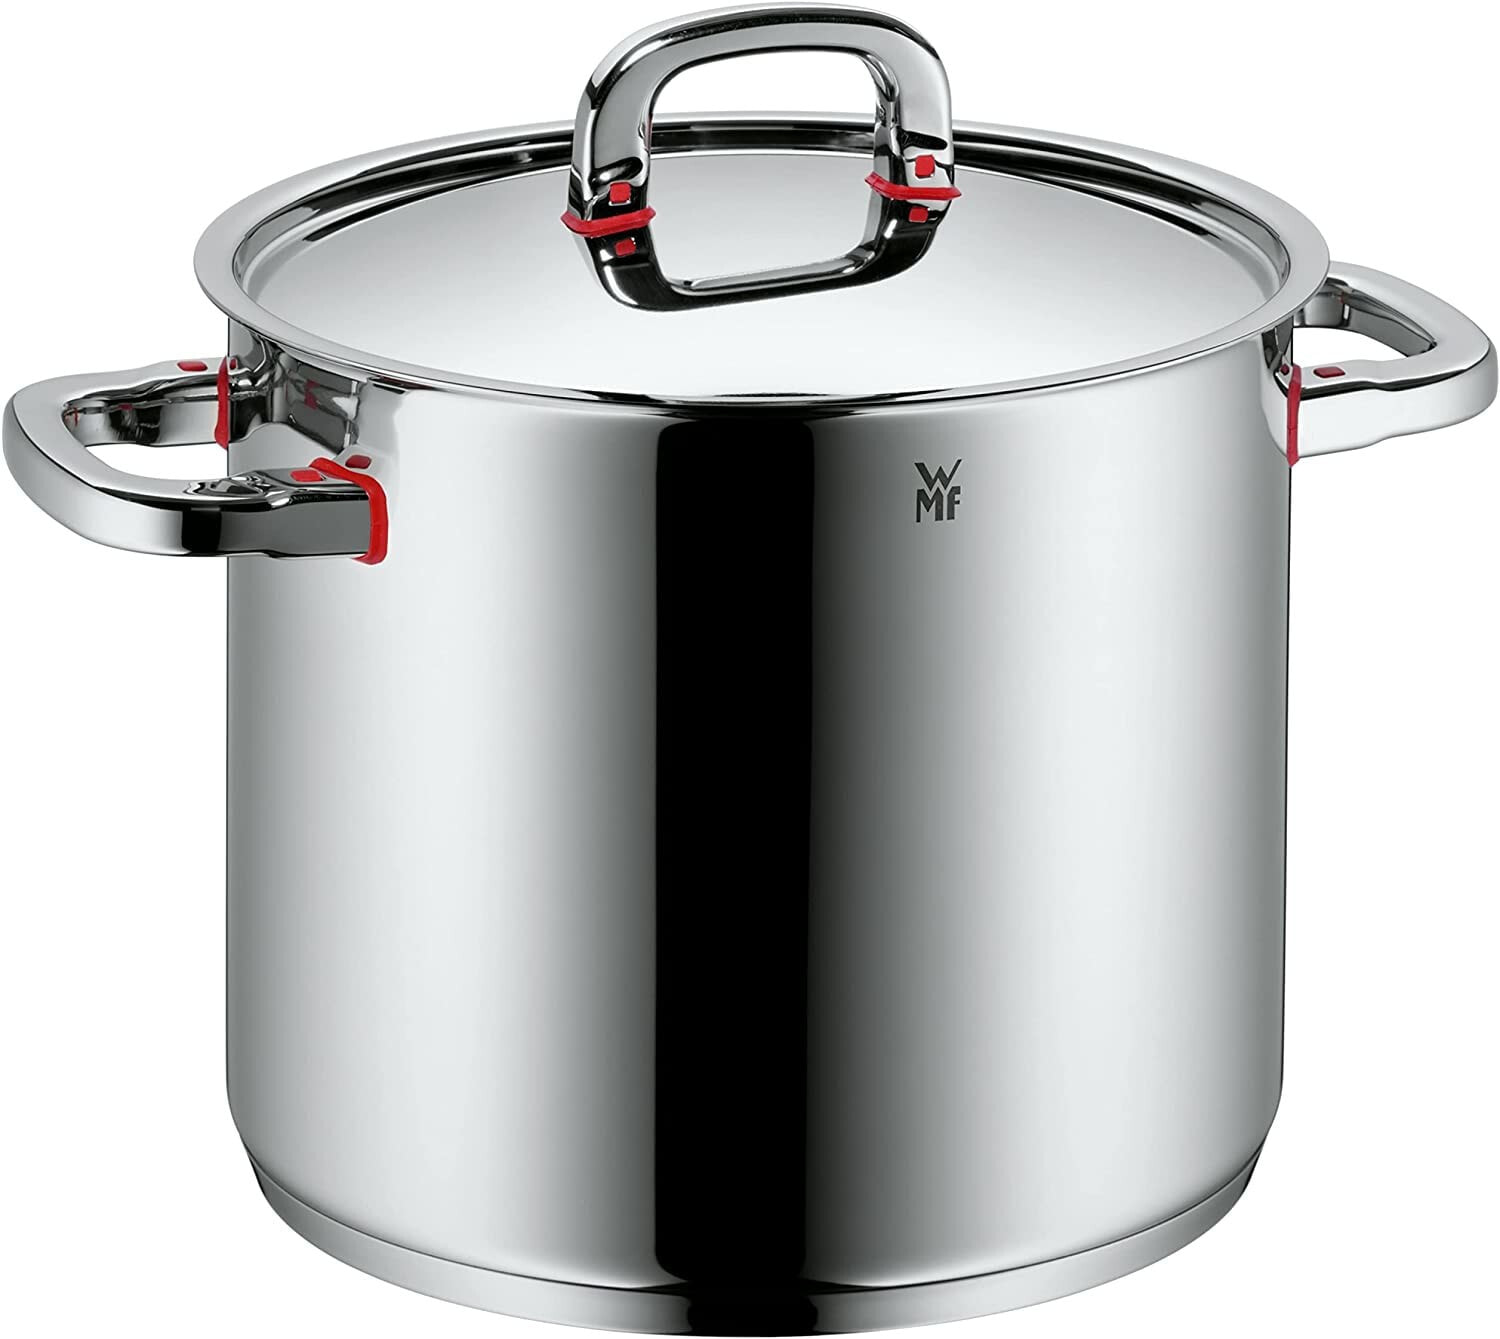 Кастрюля или ковш WMF Stock pot Ø 24 cm approx. 8,8l Premium One Inside scaling vapor hole Cool+ Technology metal lid Cromargan stainless steel brushed suitable for all stove tops including induction dishwasher-safe